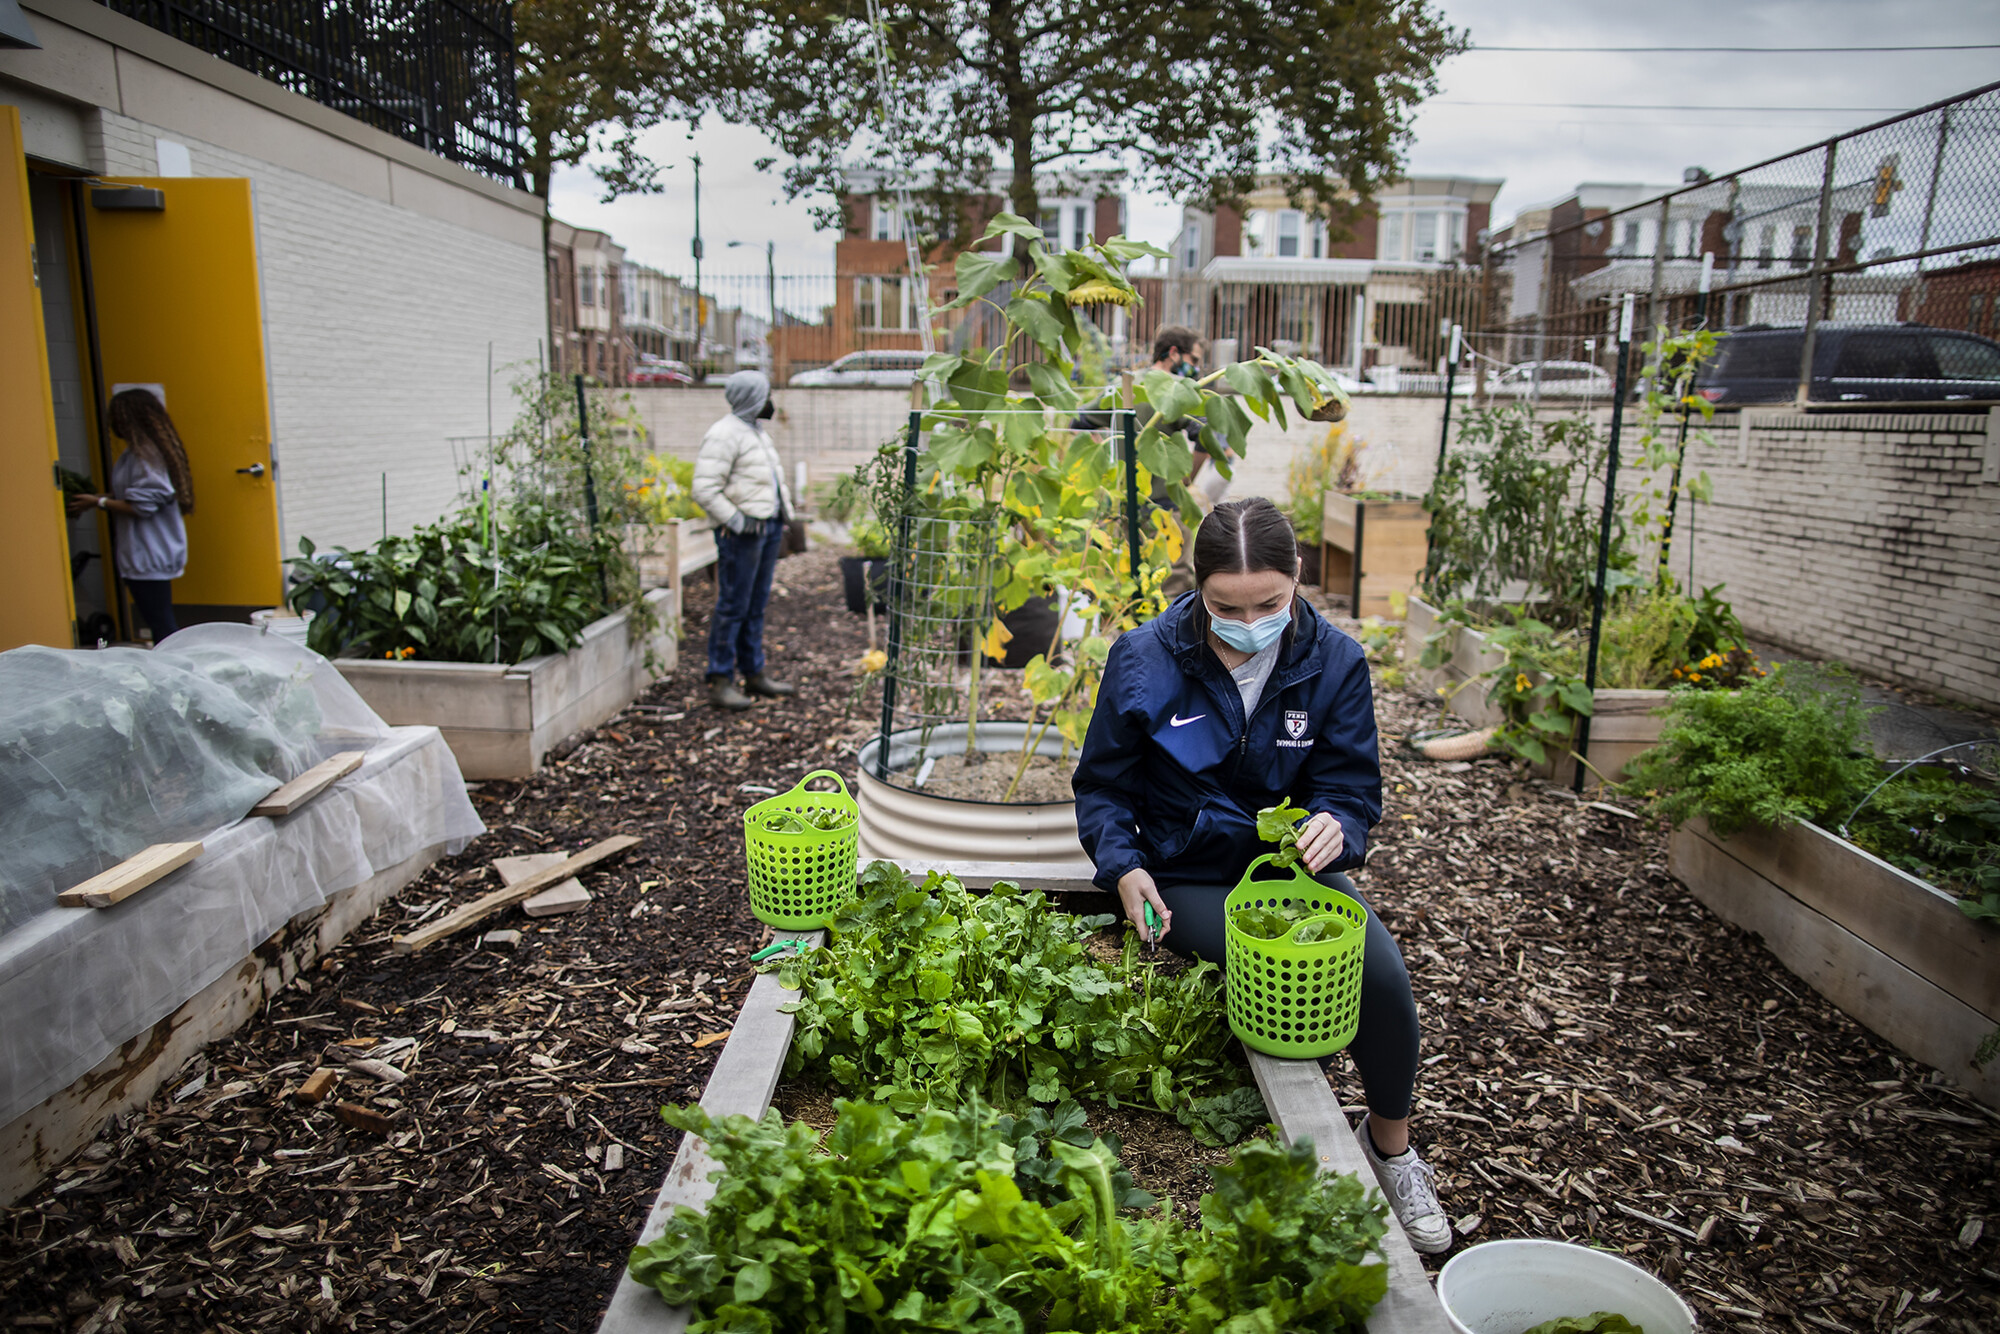 A person sits next to a raised bed harvesting greens at Hamilton school in Philadelphia.